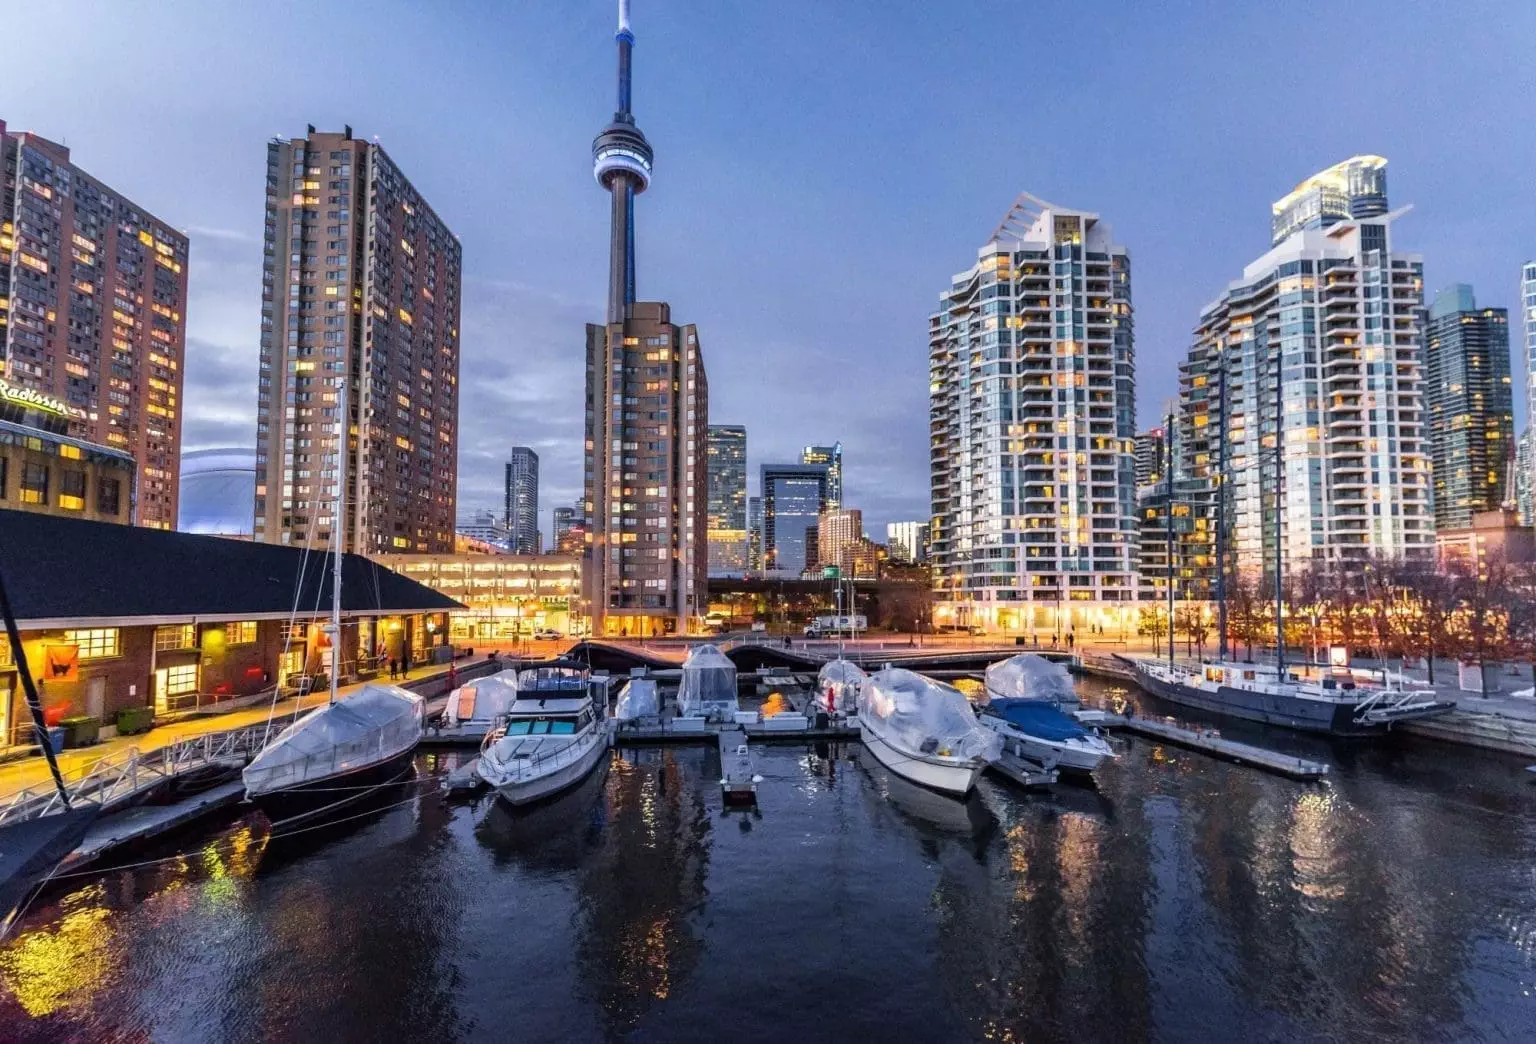 A view of cruises beside the dock with high-rise buildings in the background during the evening time in Toronto.